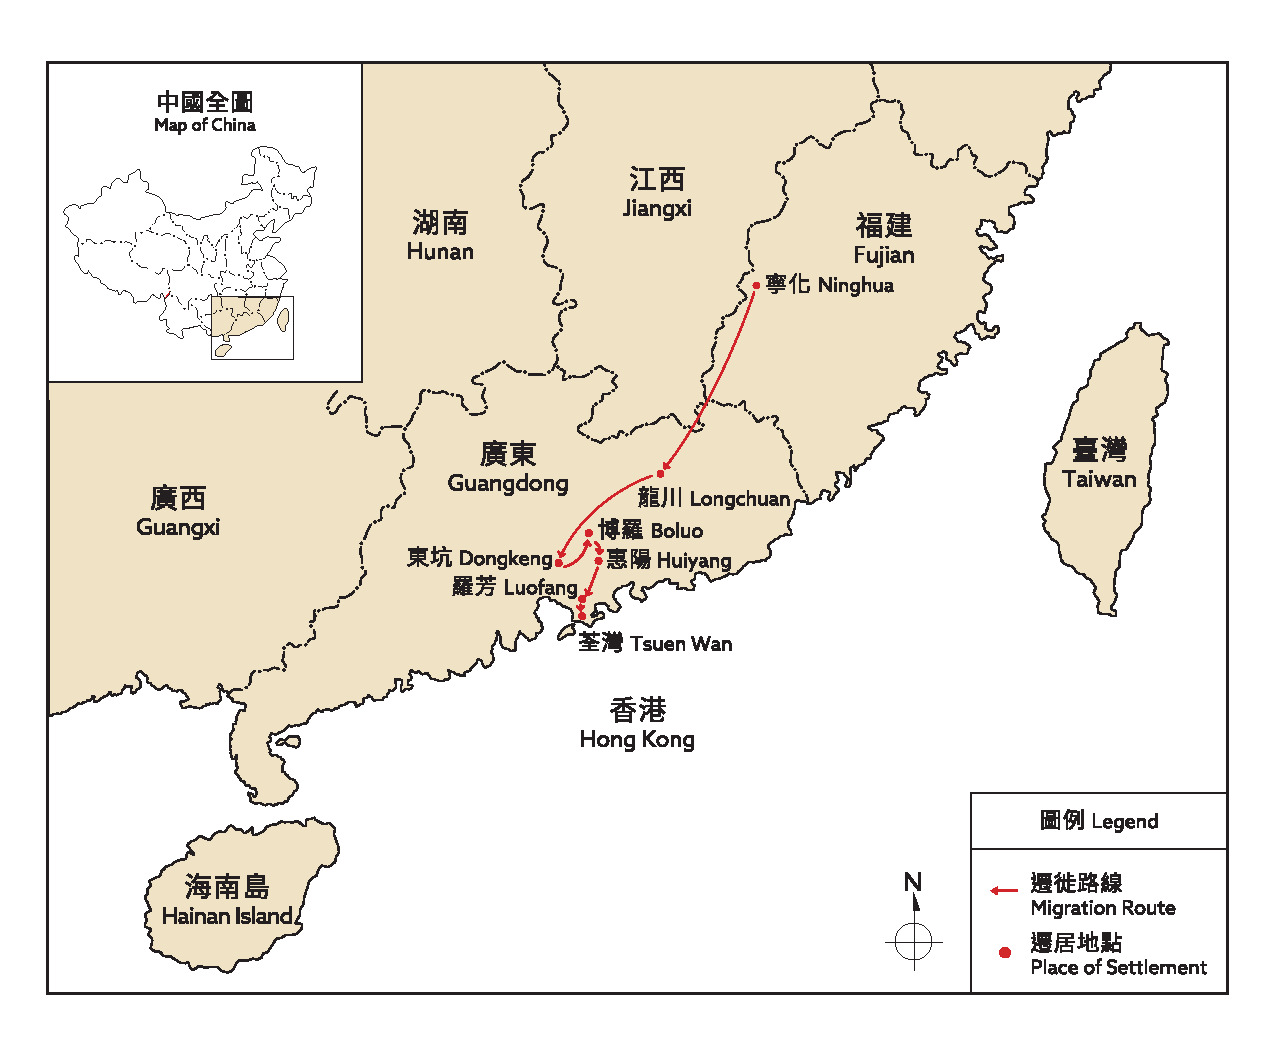 Migration route of the Chan clan of Sam Tung Uk